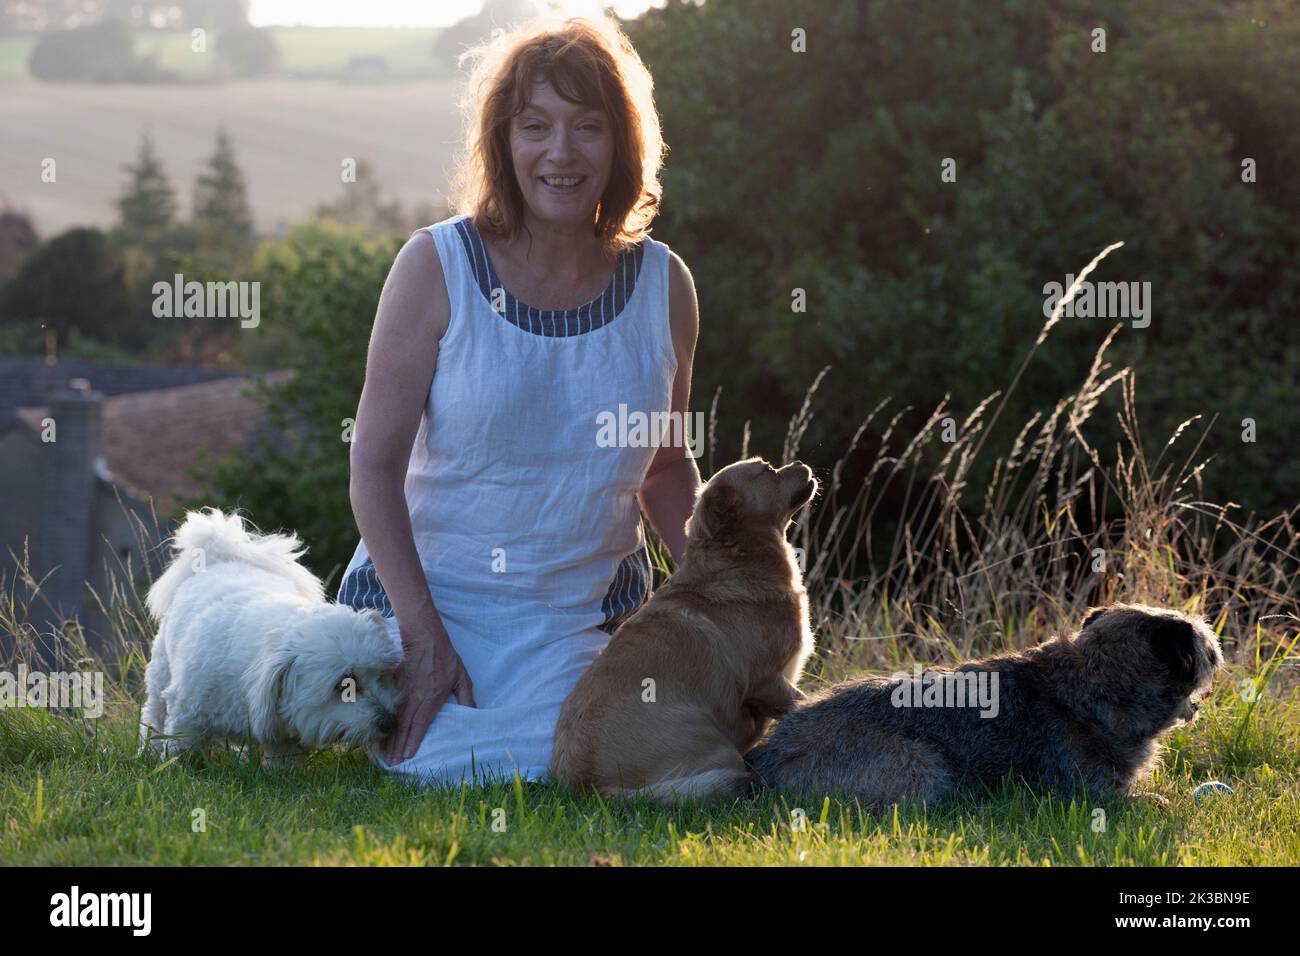 Woman smiling with three dogs Stock Photo